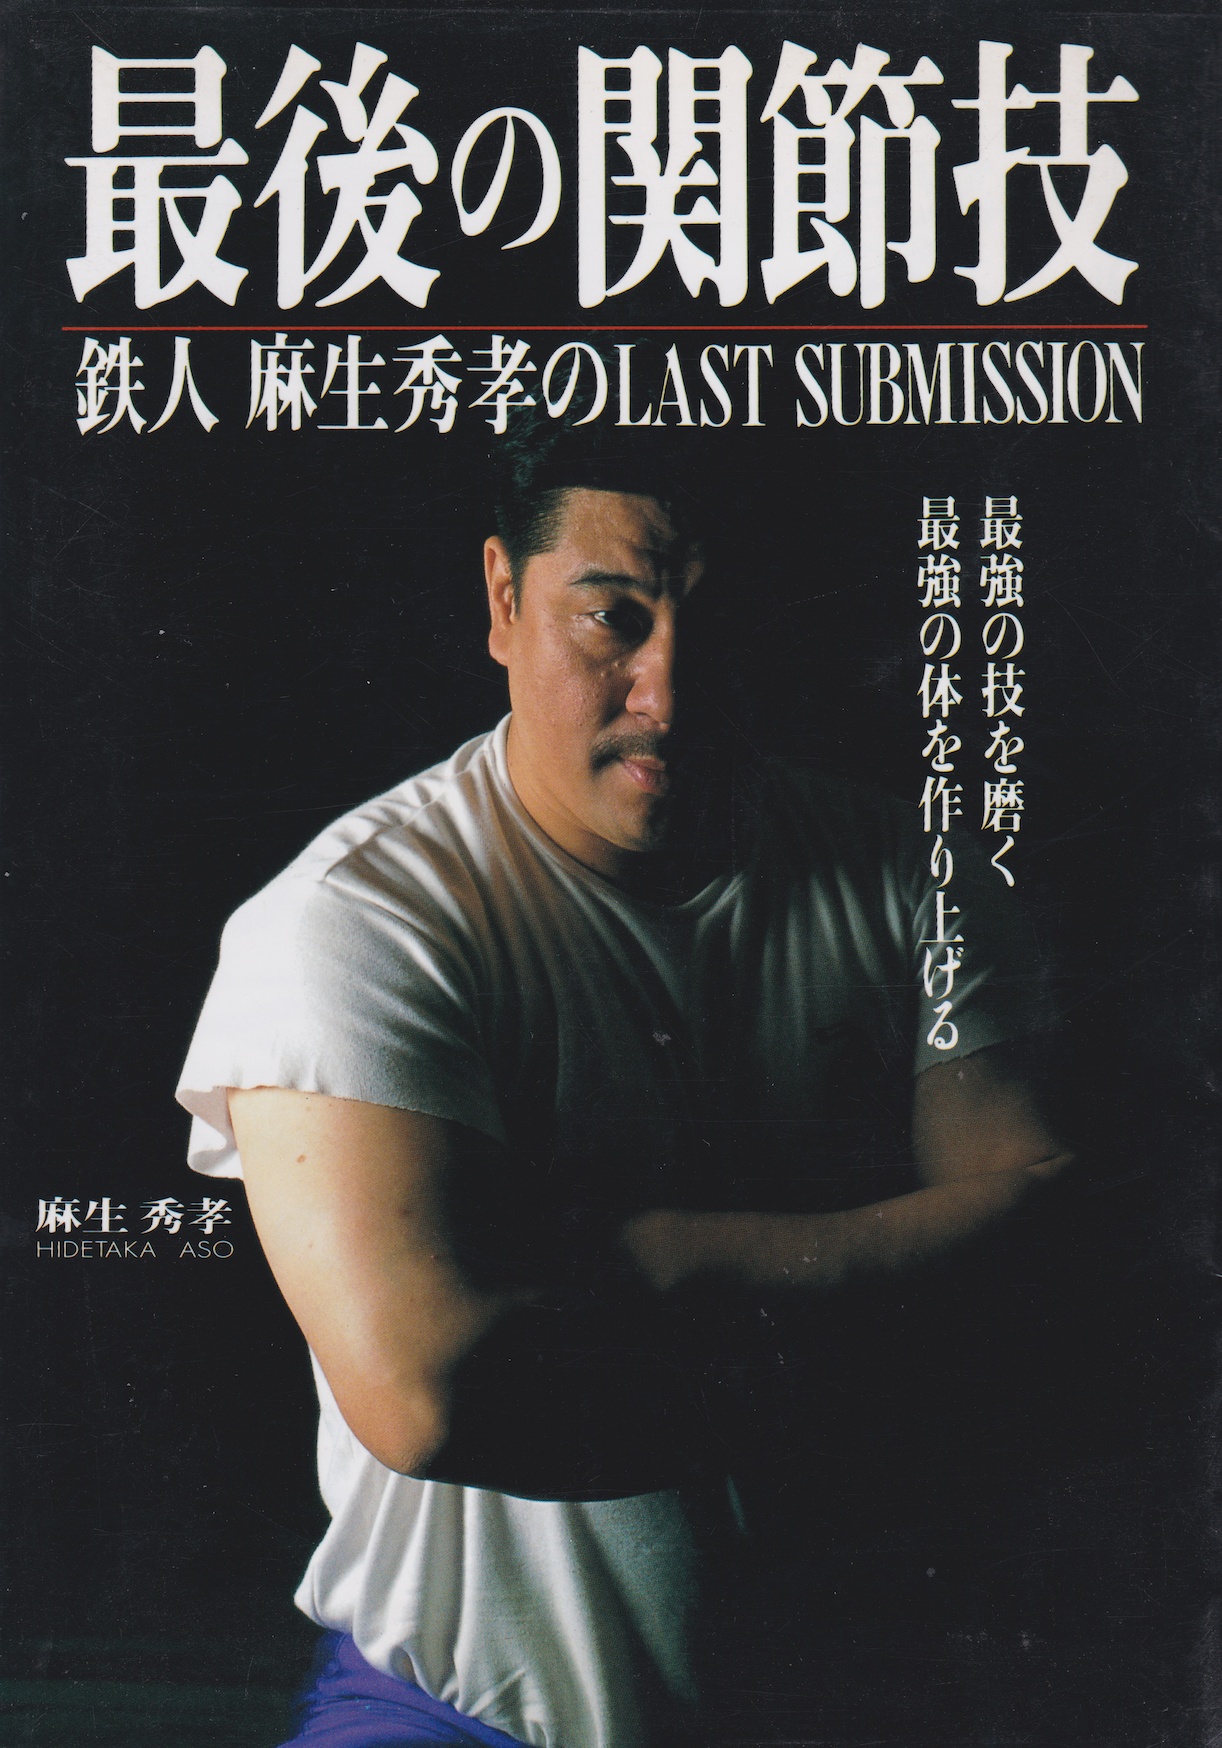 The Last Submission Book by Hidetaka Aso (Preowned) - Budovideos